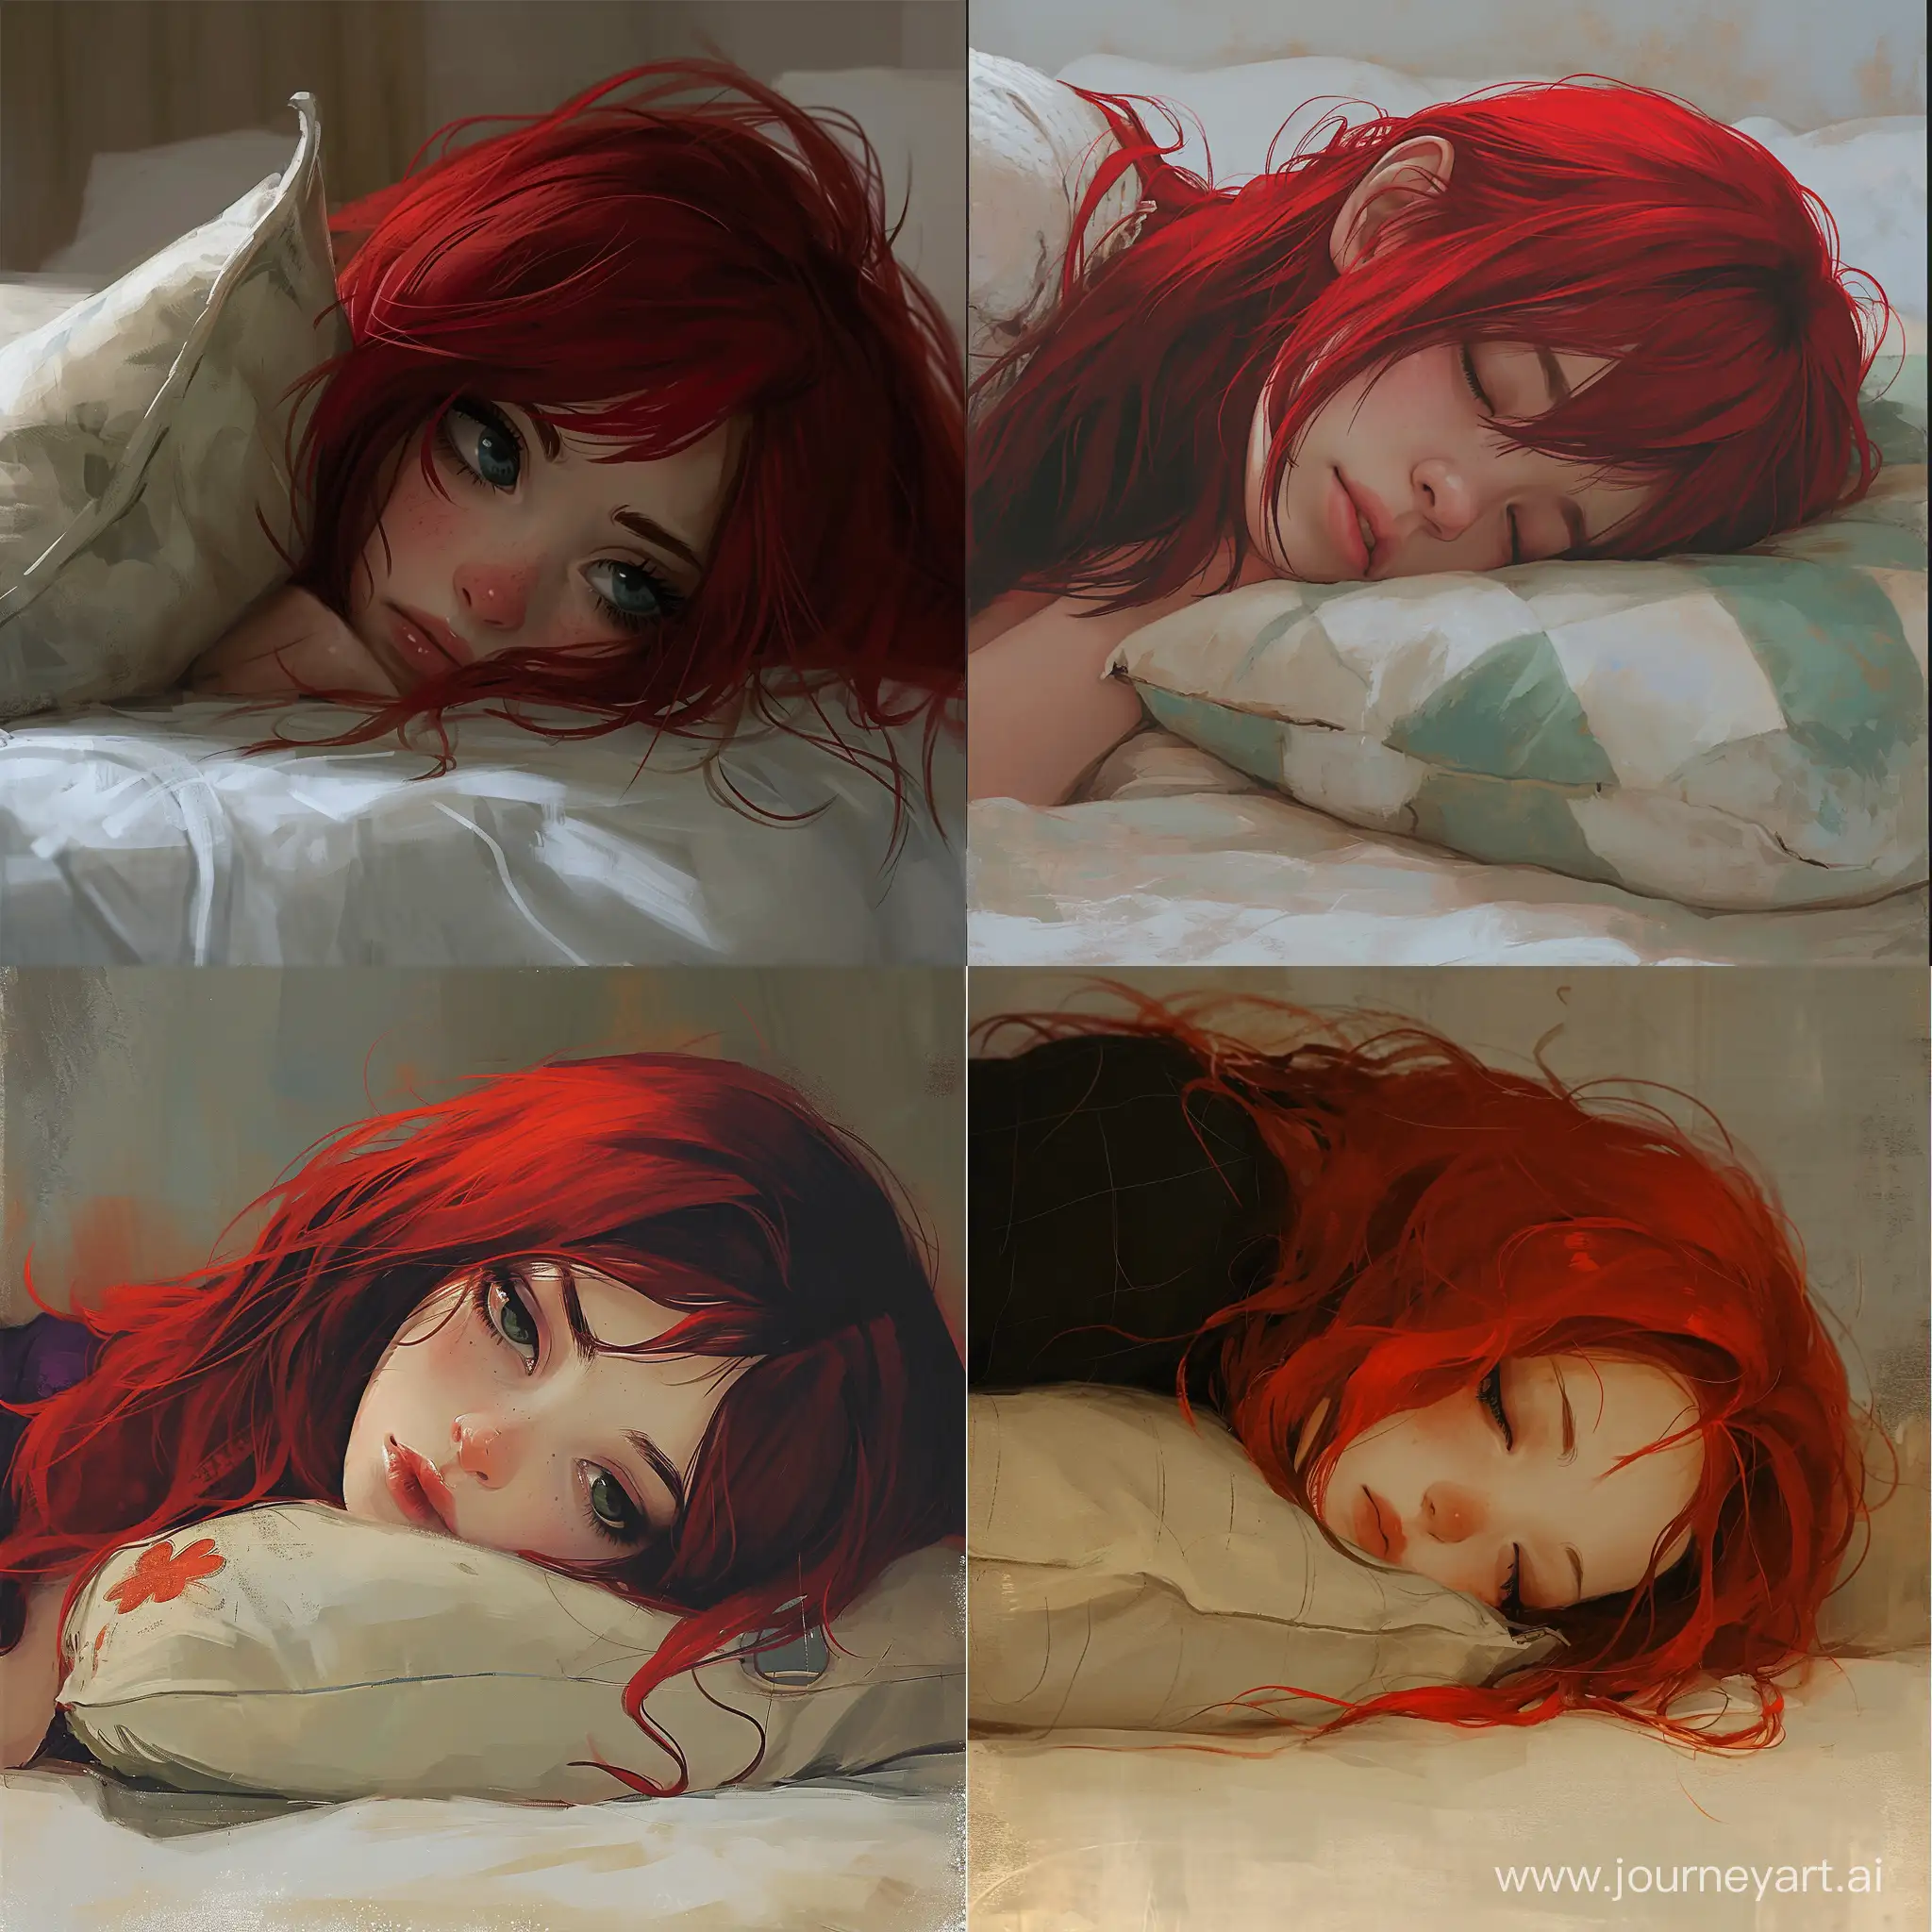 Lonely-RedHaired-Girl-Embracing-Pillow-in-Sorrowful-Repose